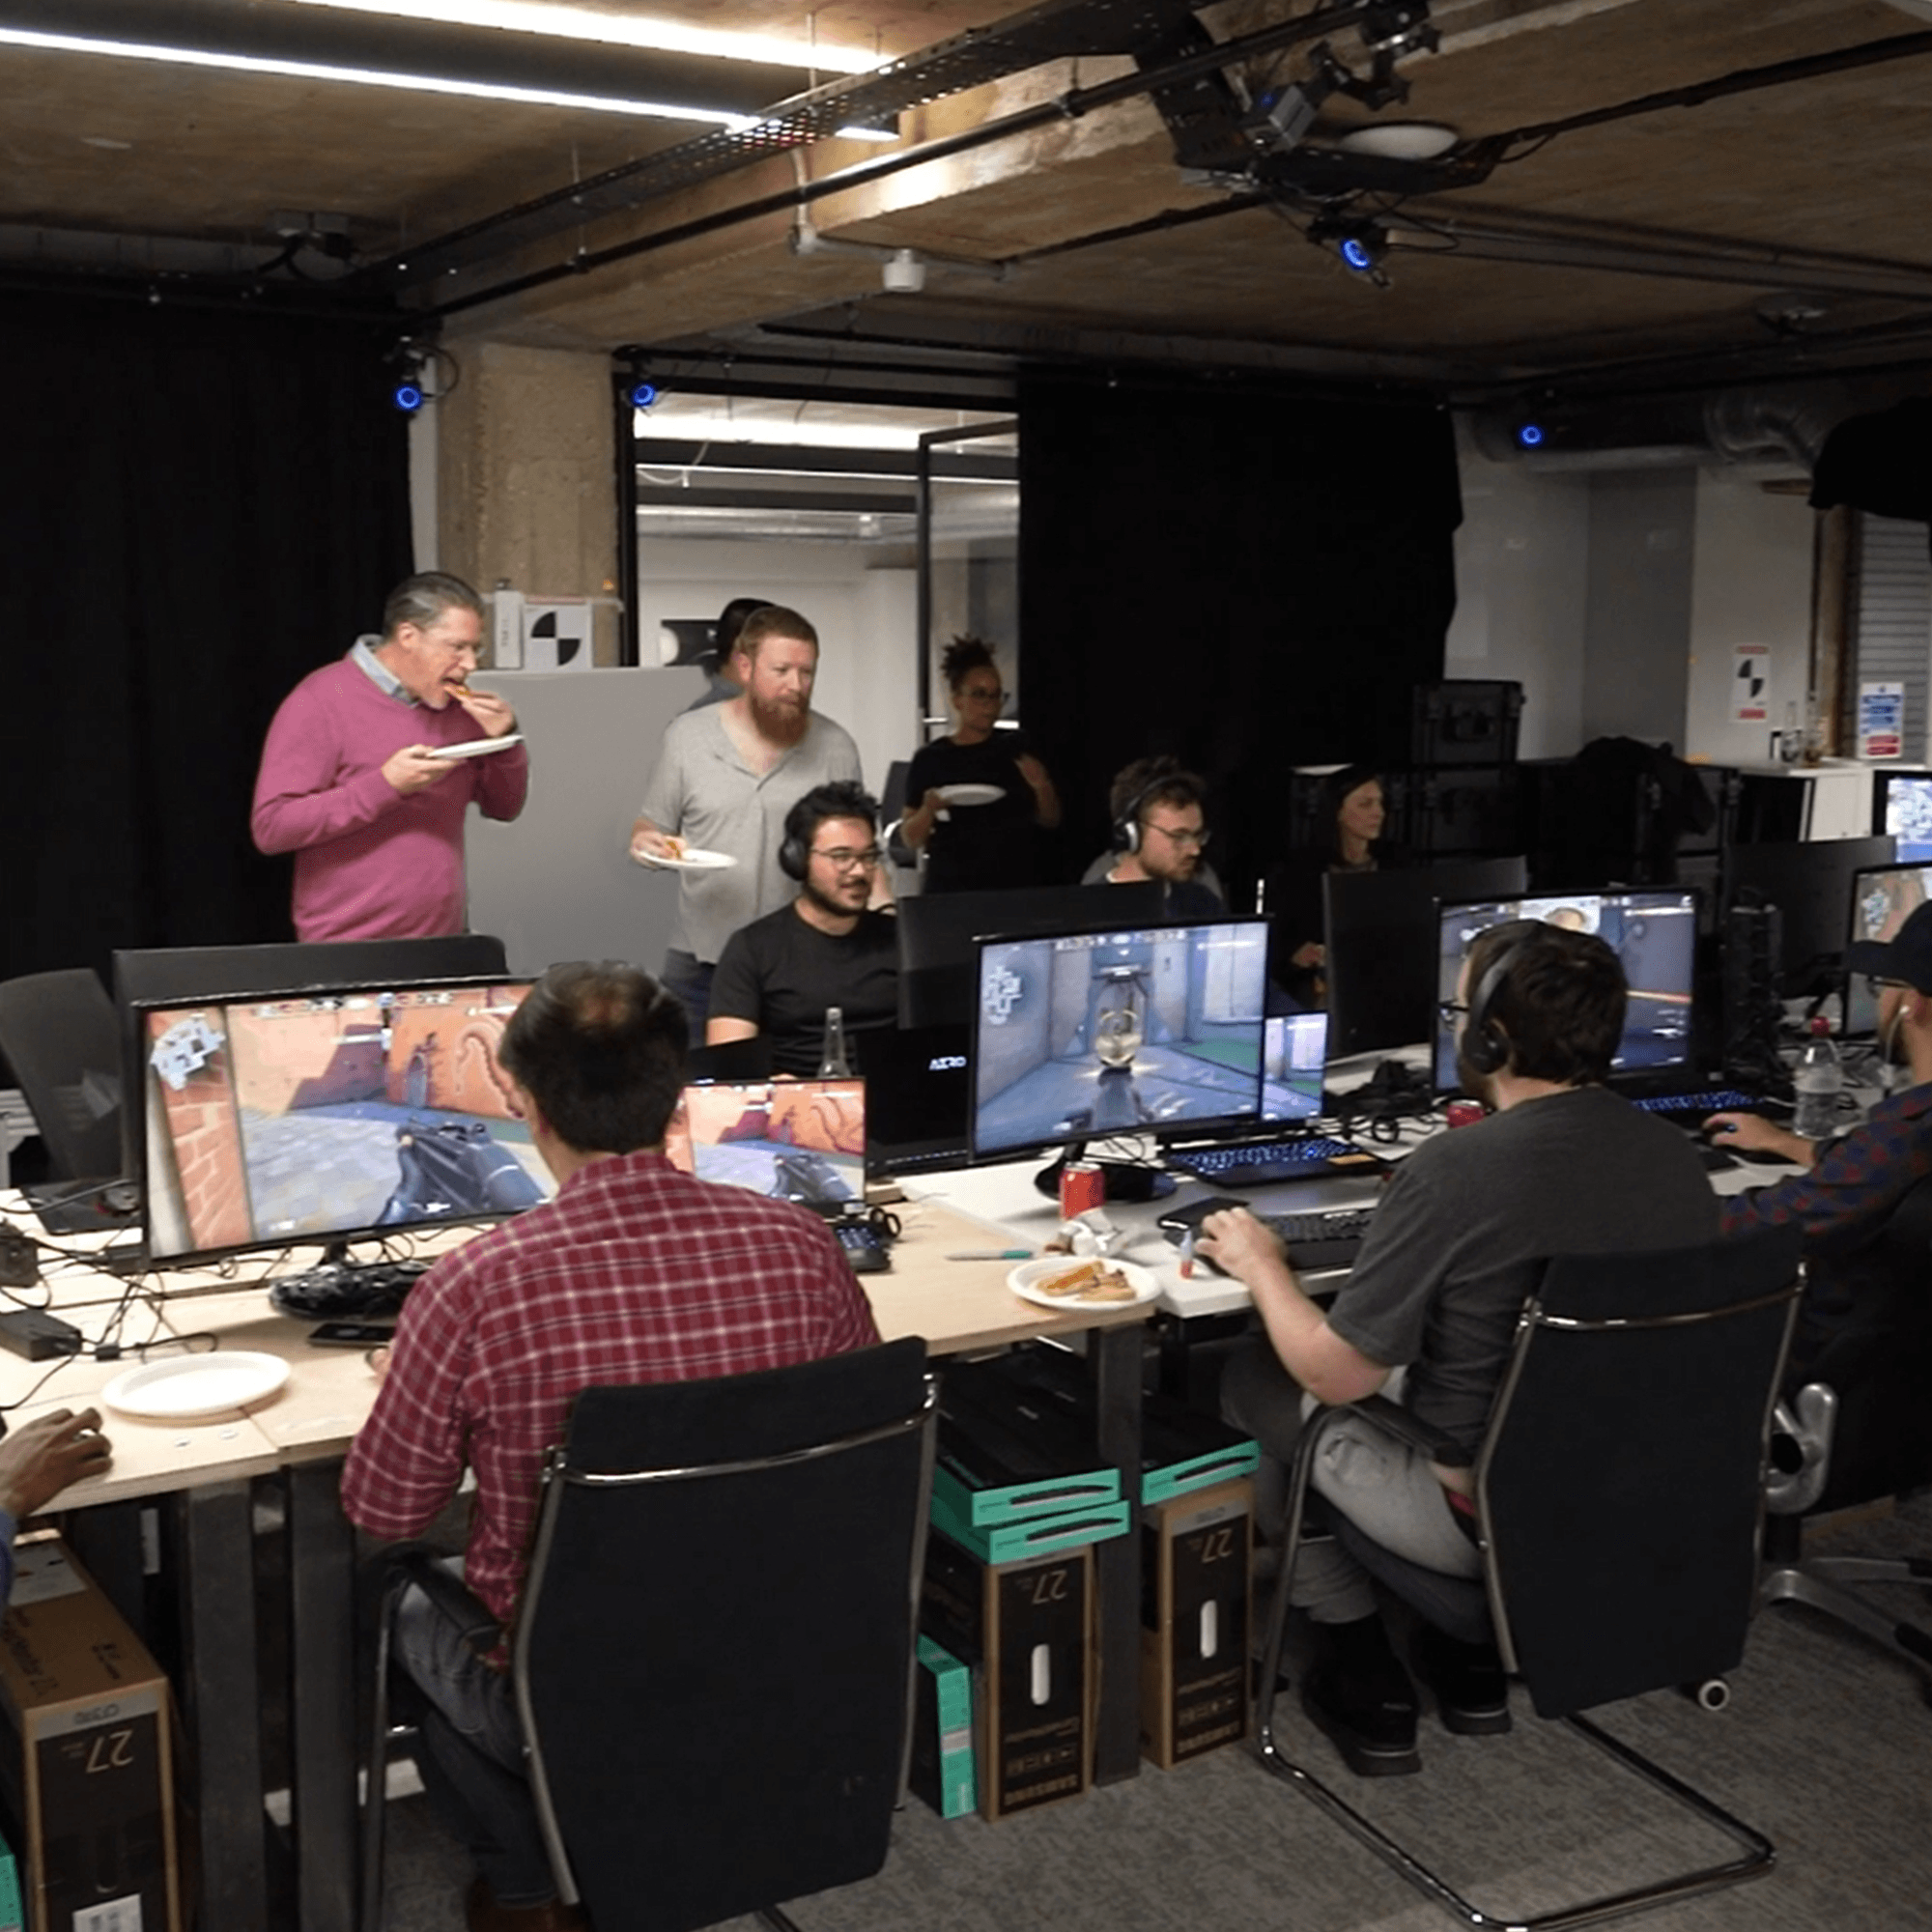 Lan party in the basement